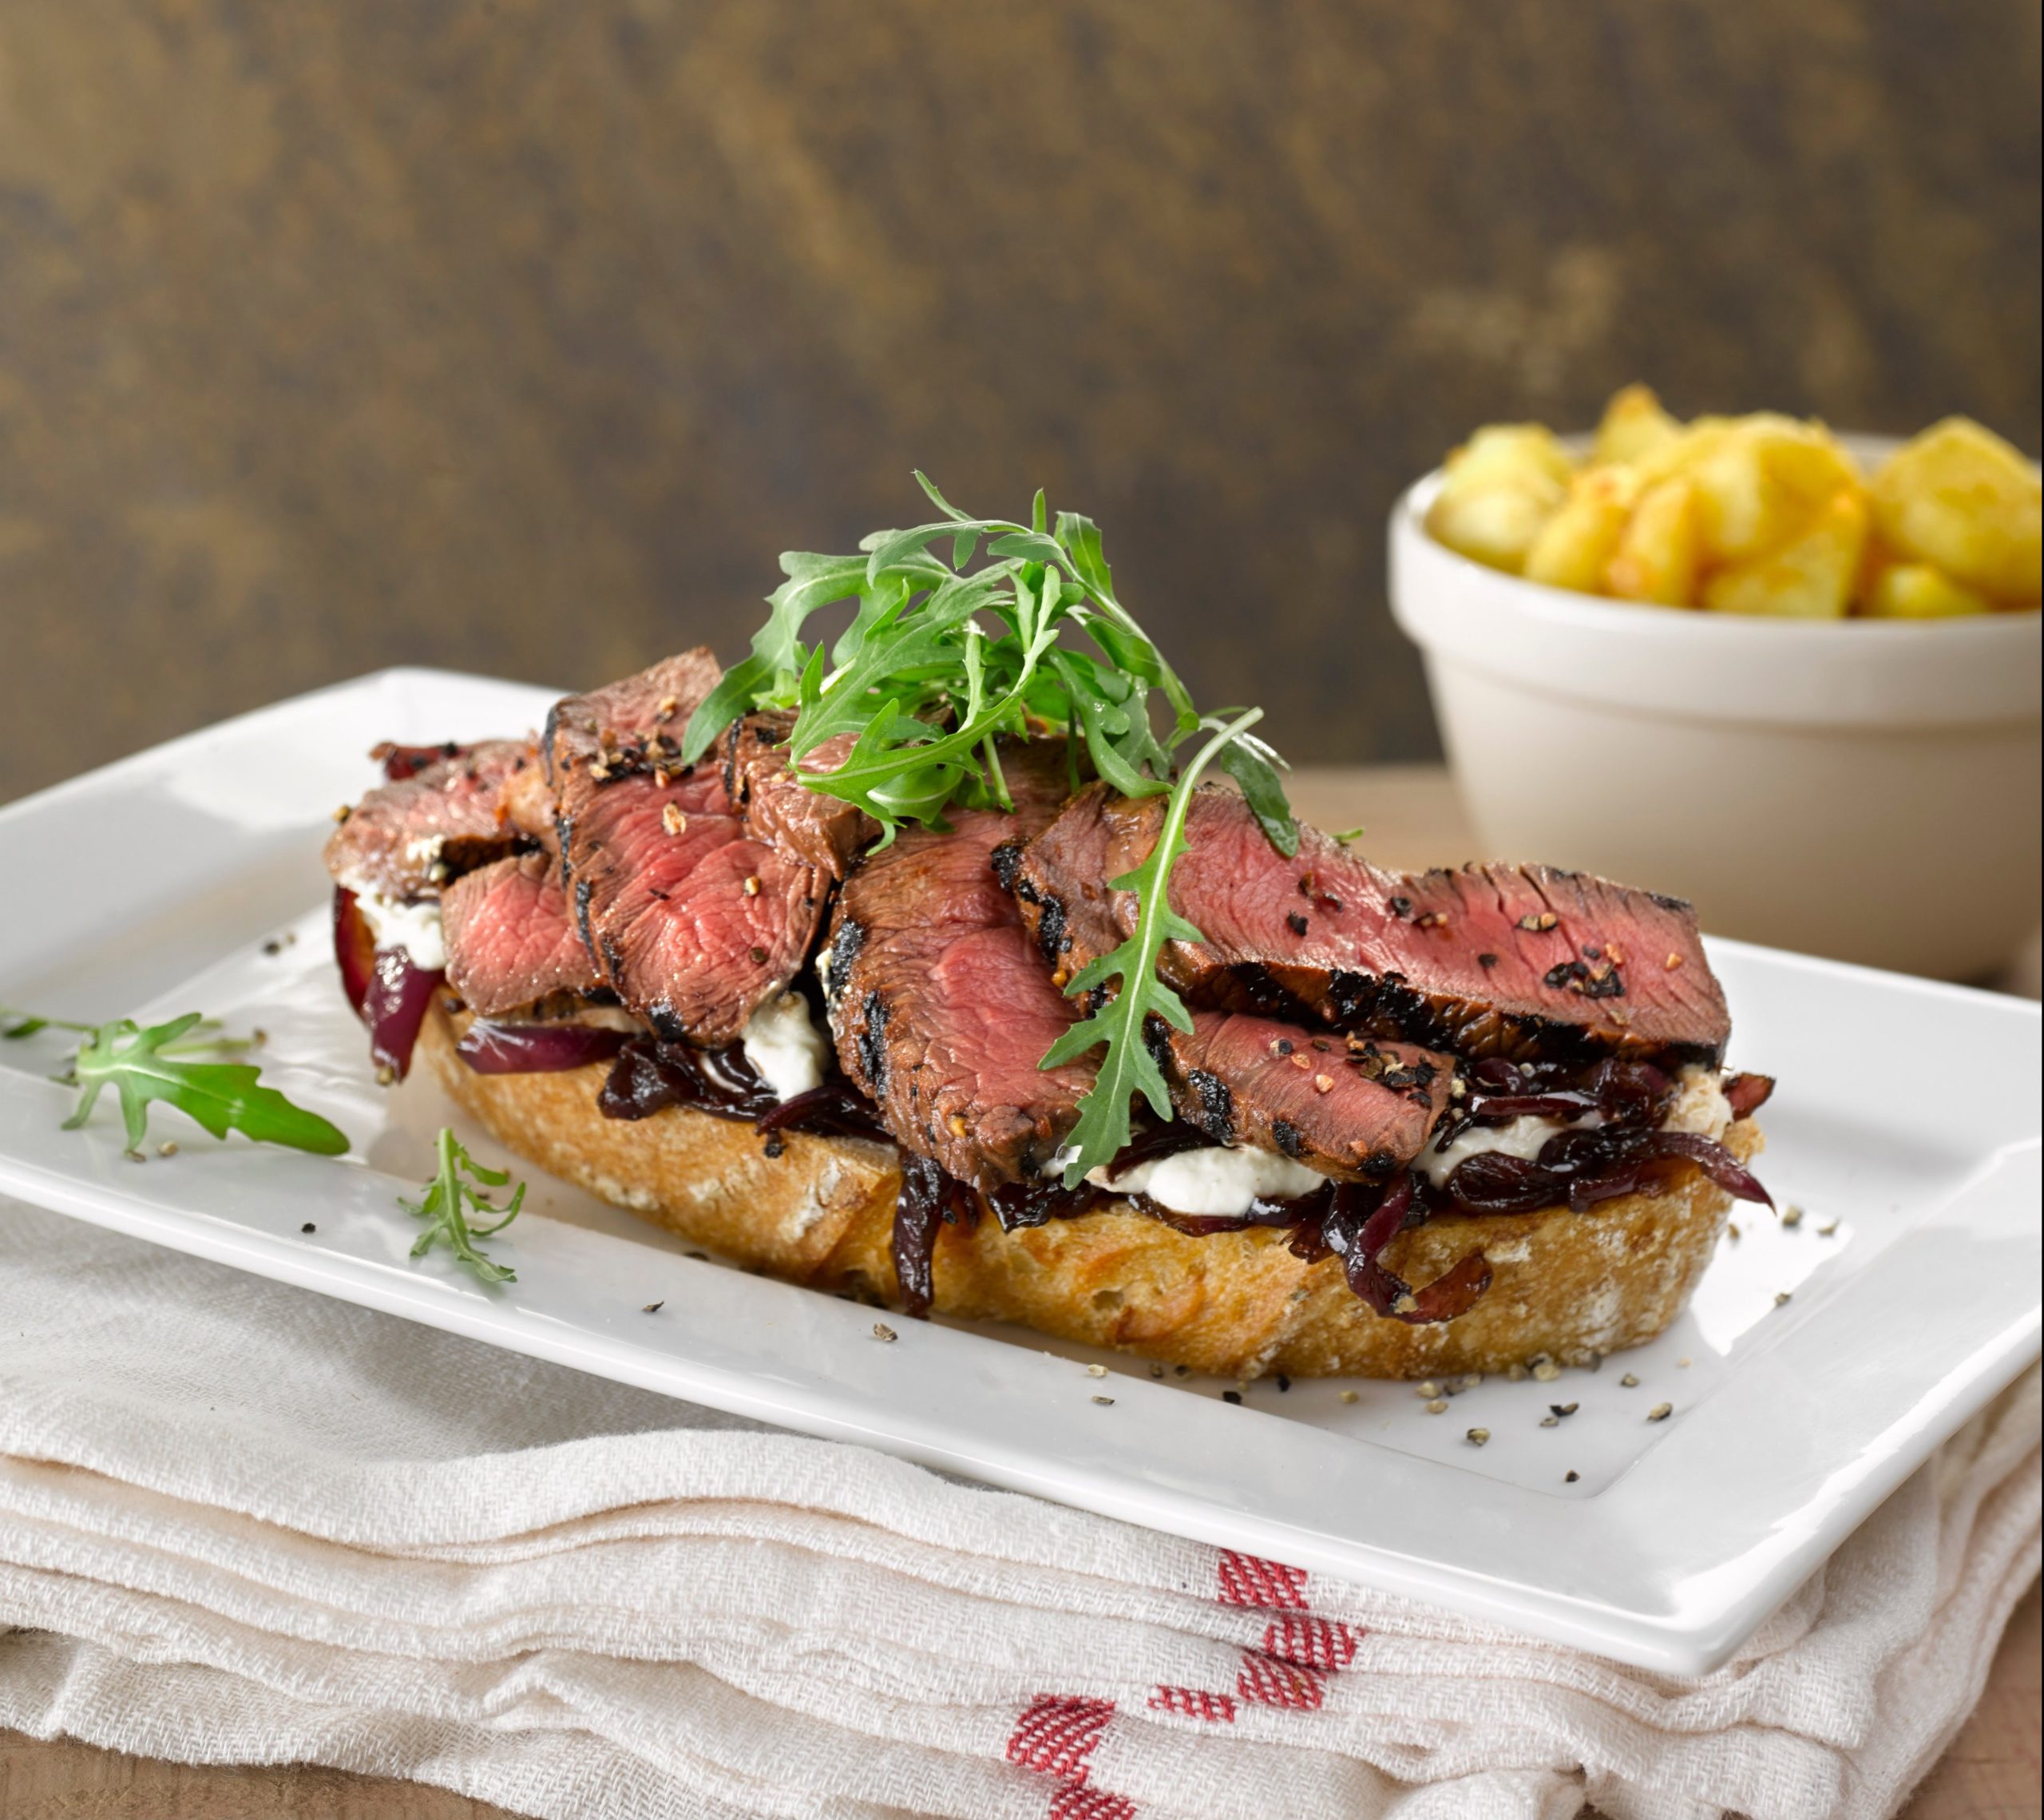 Sliced steak with caramelised red onions